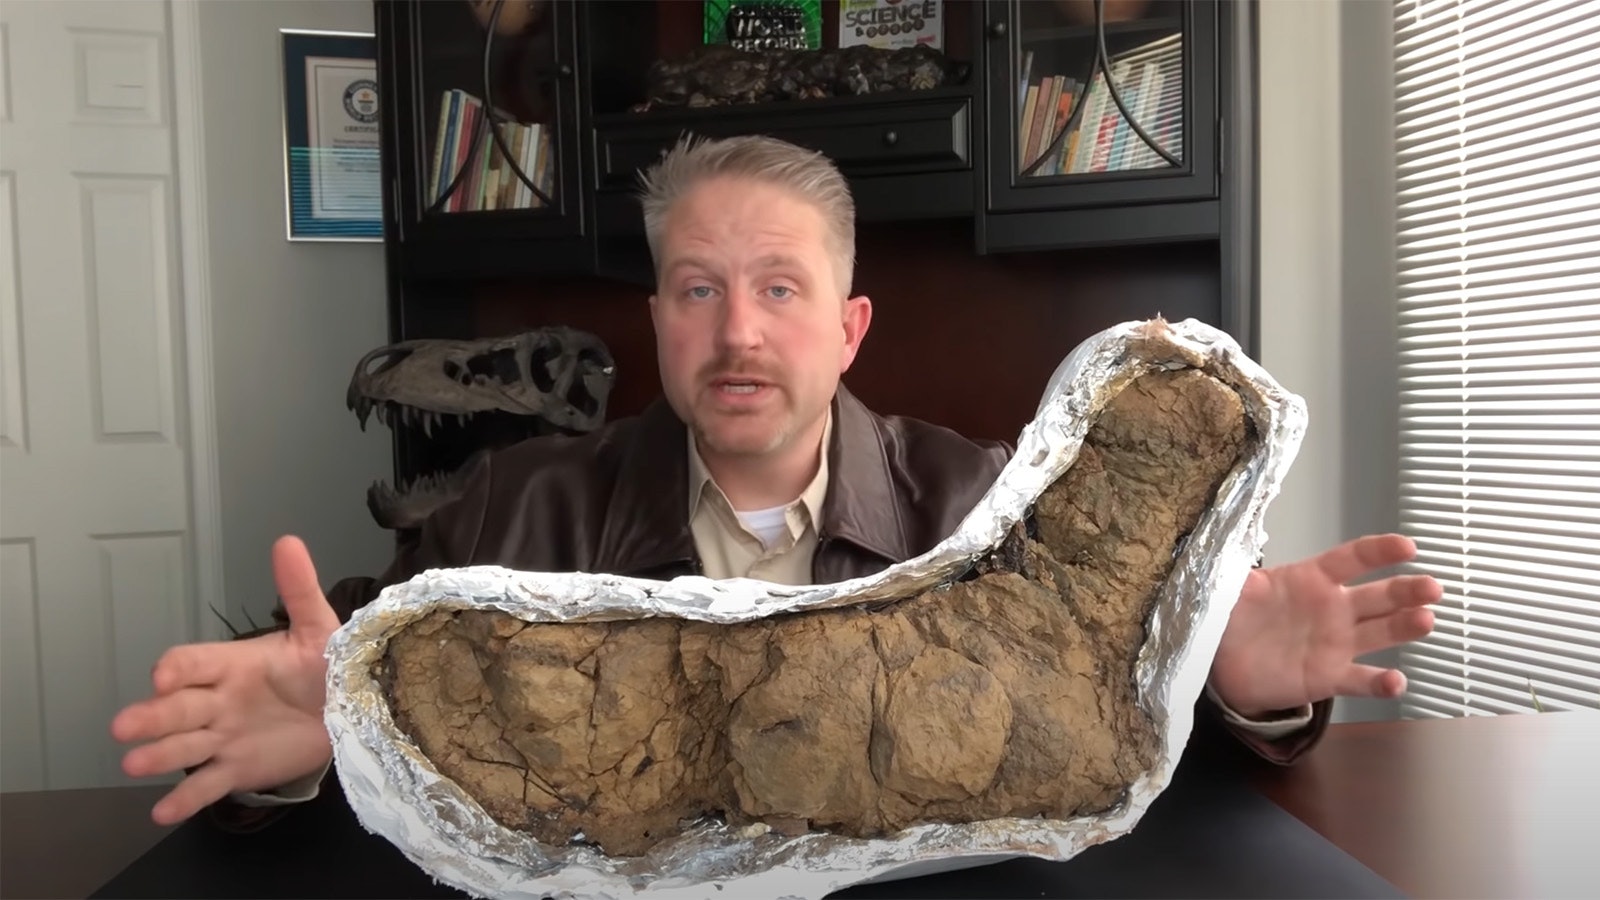 The crown jewel of George Frandsen's collection of fossilized dinosaur poop is this specimen, the largest prehistoric poop ever discovered.